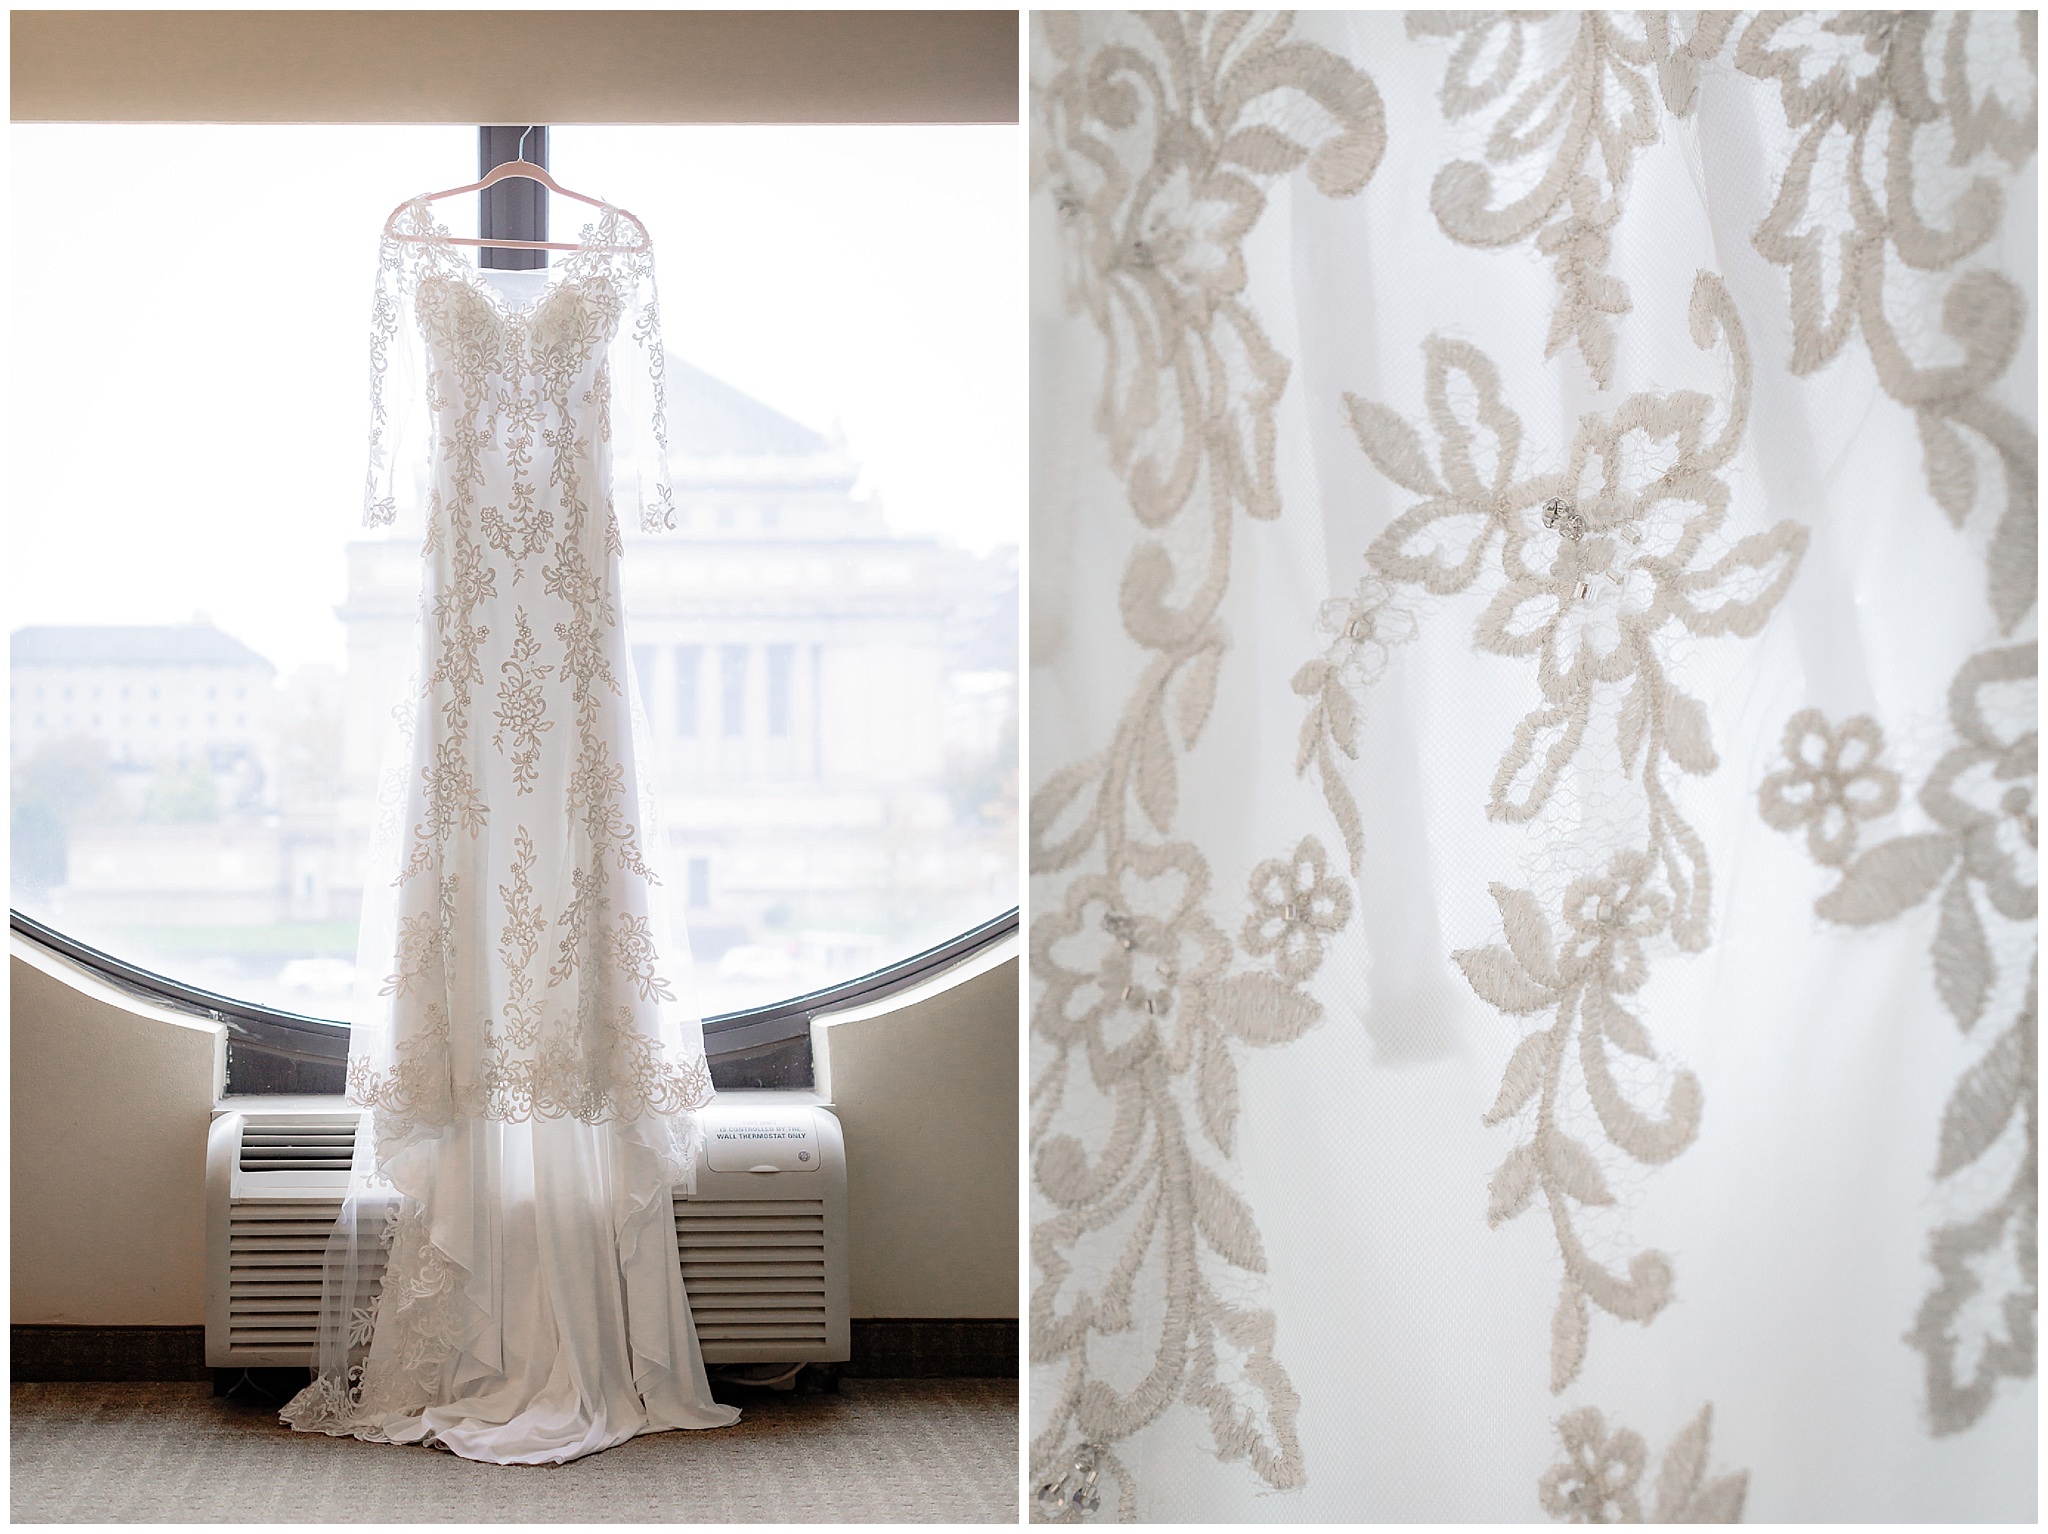 Sottero & Midgley wedding dress hangs in the window with Soldiers & Sailors Memorial Hall in the background